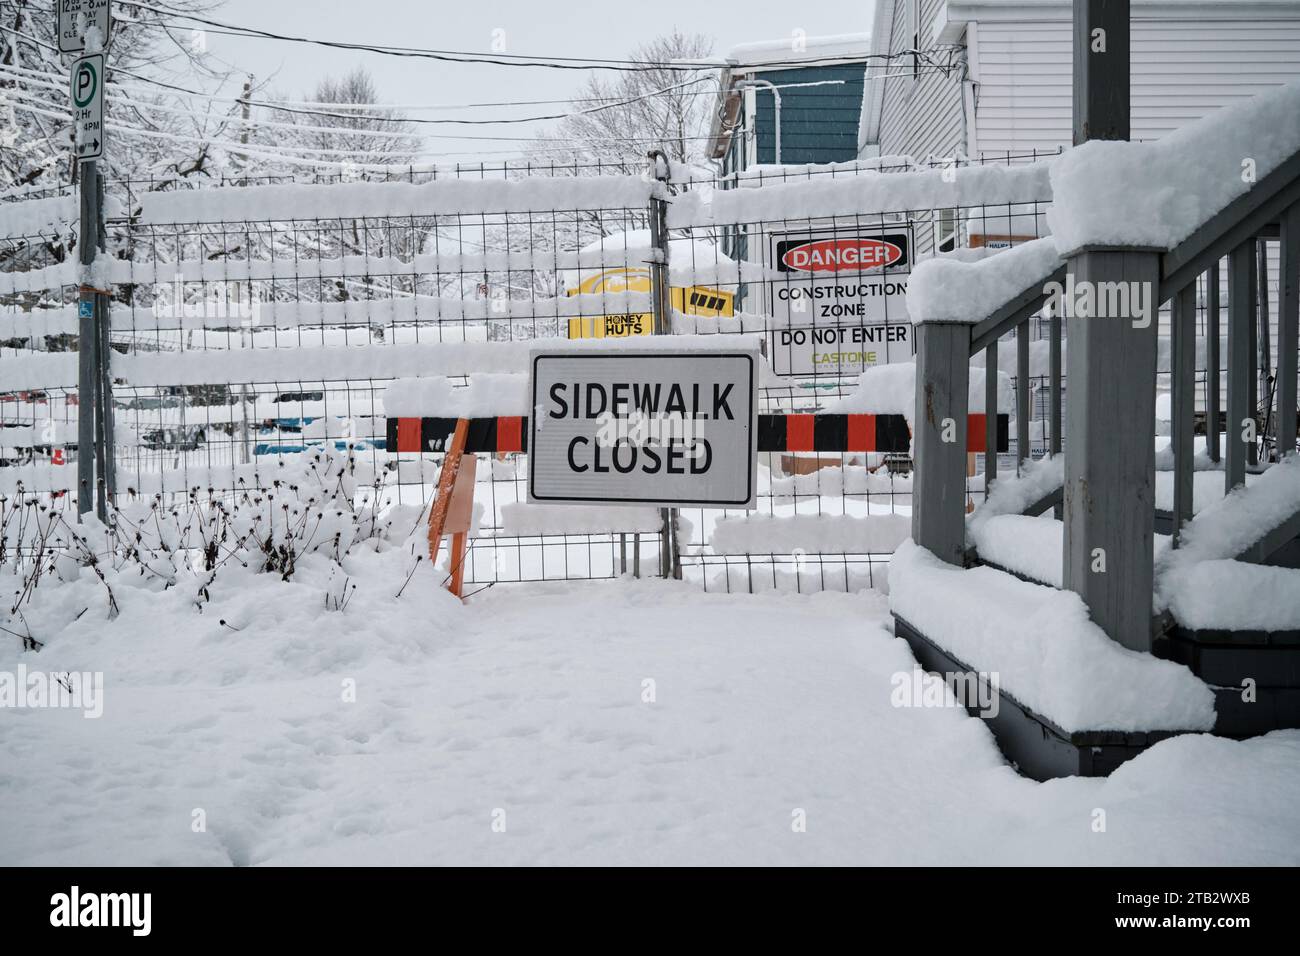 Halifax, Nova Scotia, Canada. December 4th, 2023. Sidewalk closed sign due to construction, with sidewalk covered in snow following storm making hard for pedestrians Stock Photo